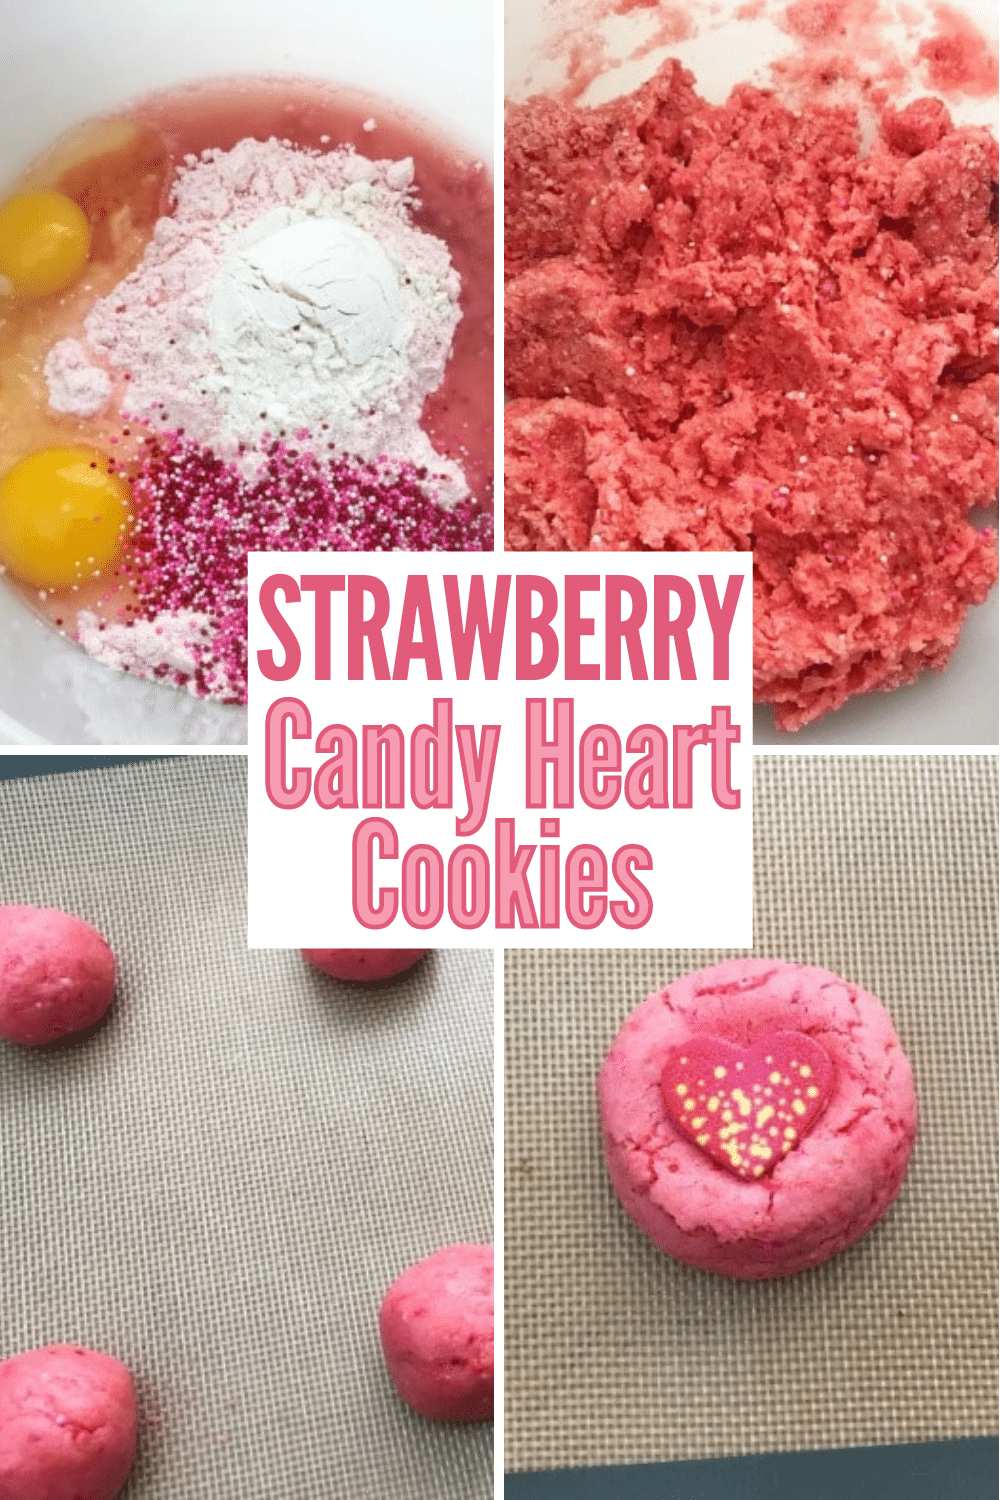 Strawberry Candy Heart Cookies are the perfect treat for Valentine's Day. This is also a simple cookie recipe made with a cake mix. #cookies #ValentinesDay #strawberry via @wondermomwannab